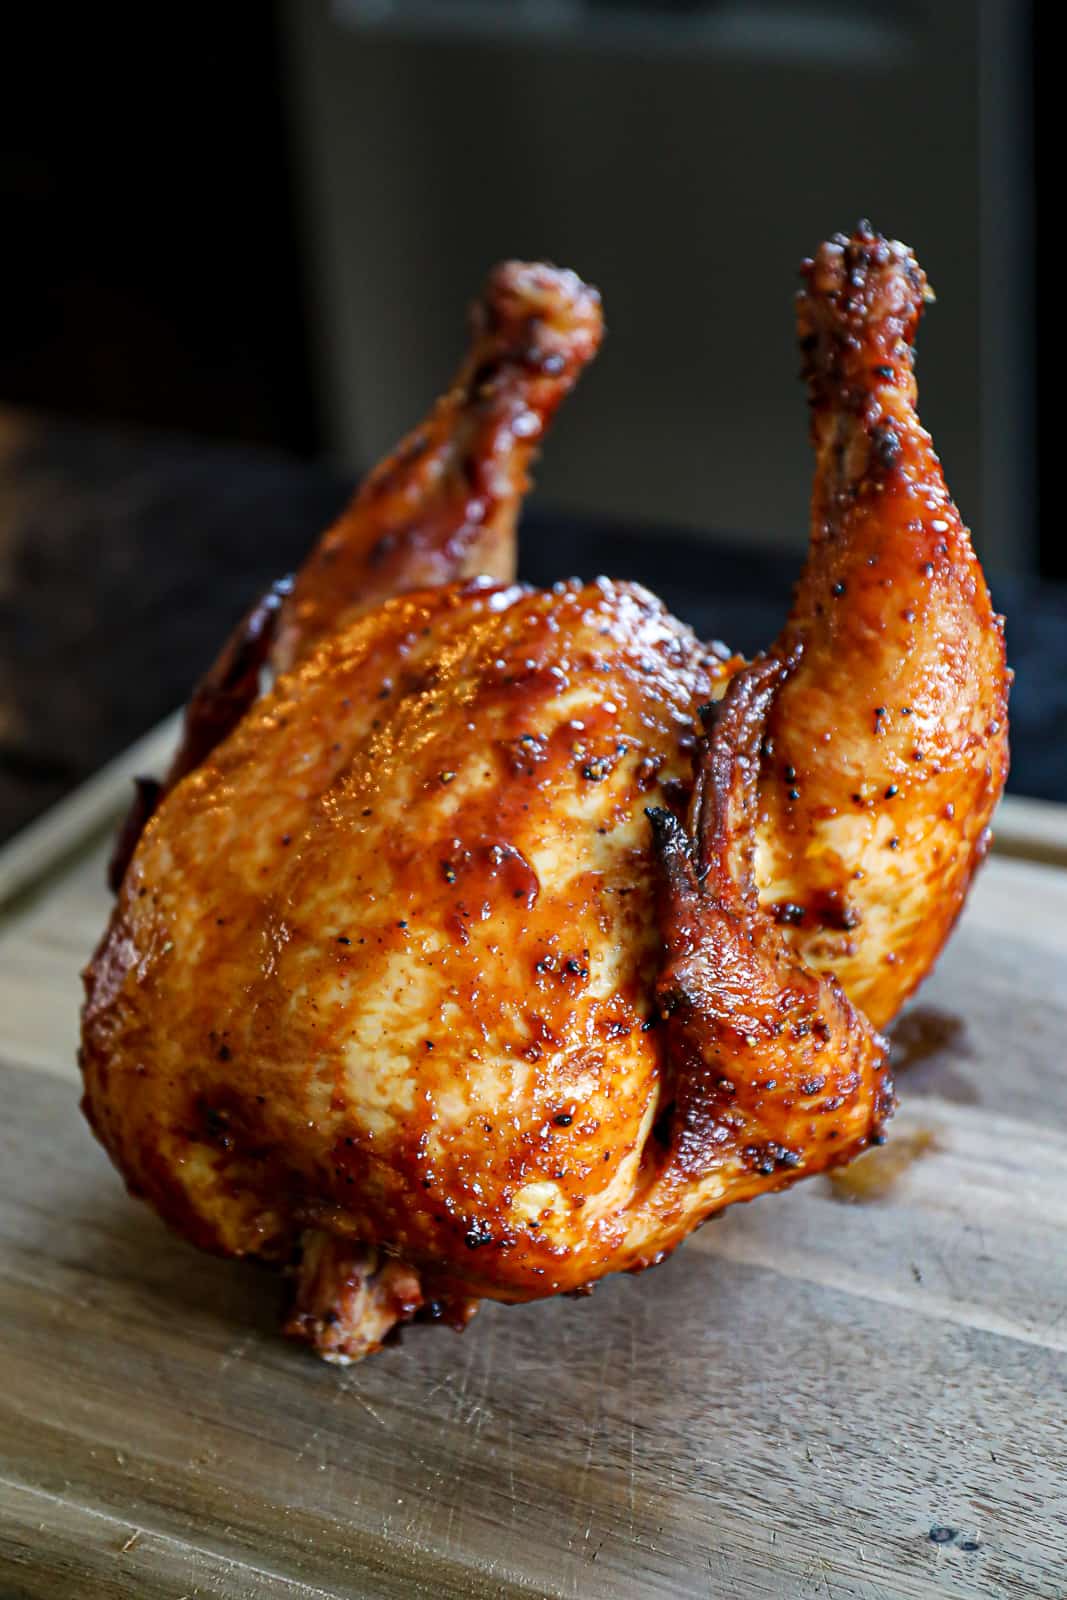 Pellet Grill Smoked Beer Can Chicken After Smoking And Resting On A Cutting Board